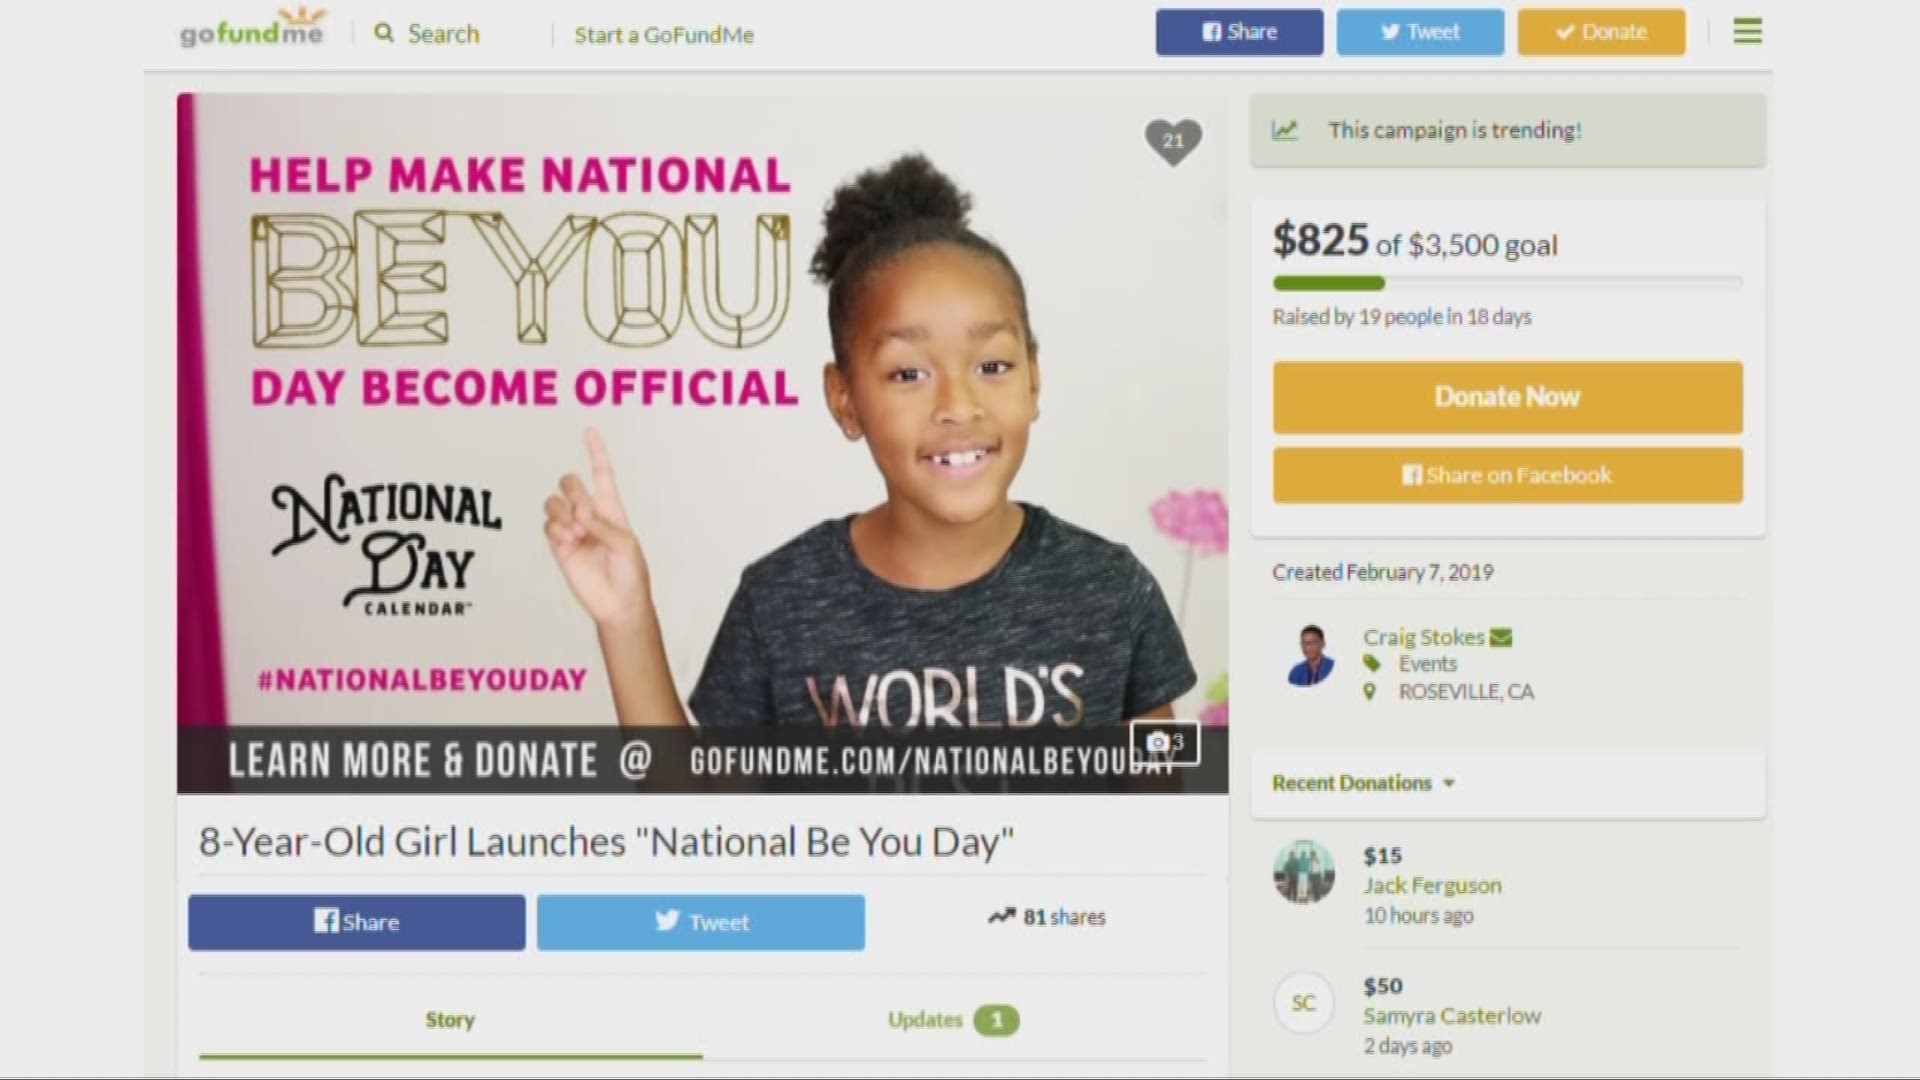 For London Stokes, if there can be a National Pancake Day and a National Donut day, then there can certainly be room for a "National Be You Day". This Roseville third grader is raising funds to help make a national day for all people to celebrate who they are.